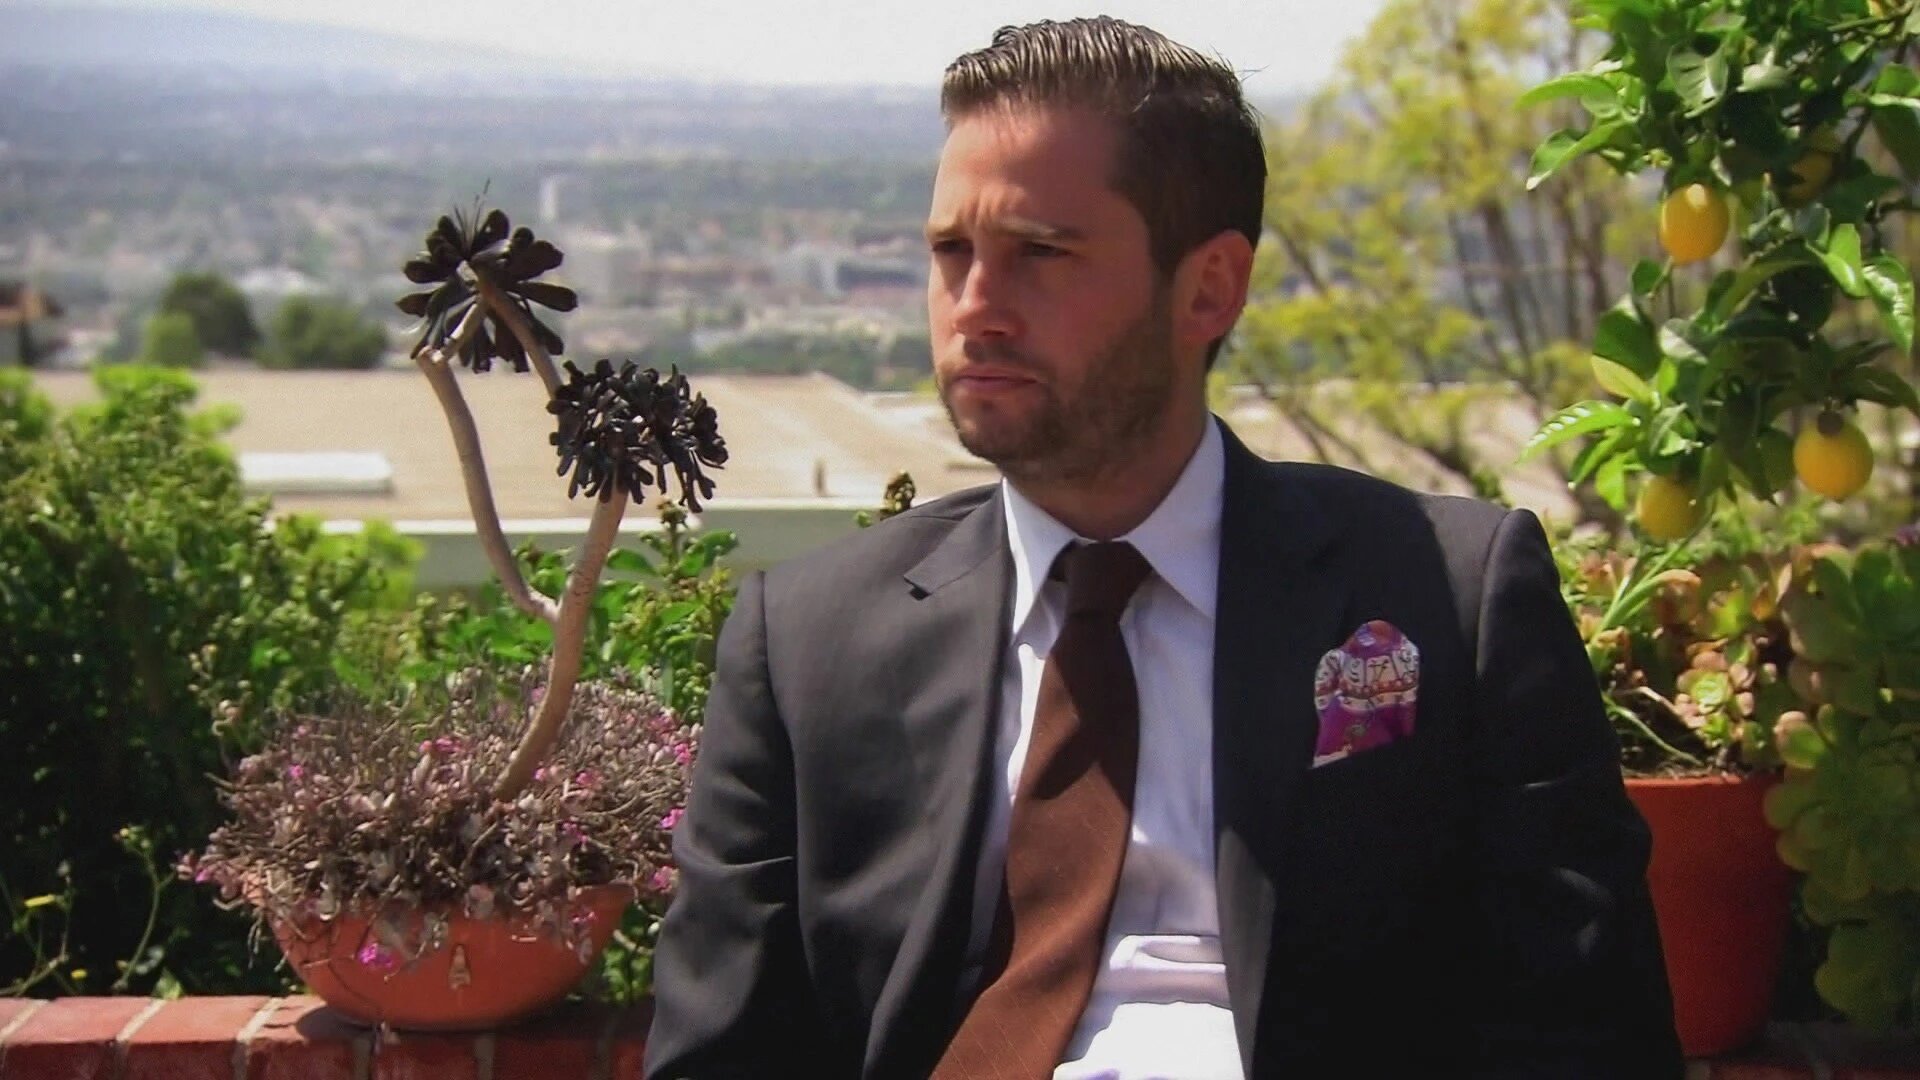 Million Dollar Listing S6E11 This Means War!